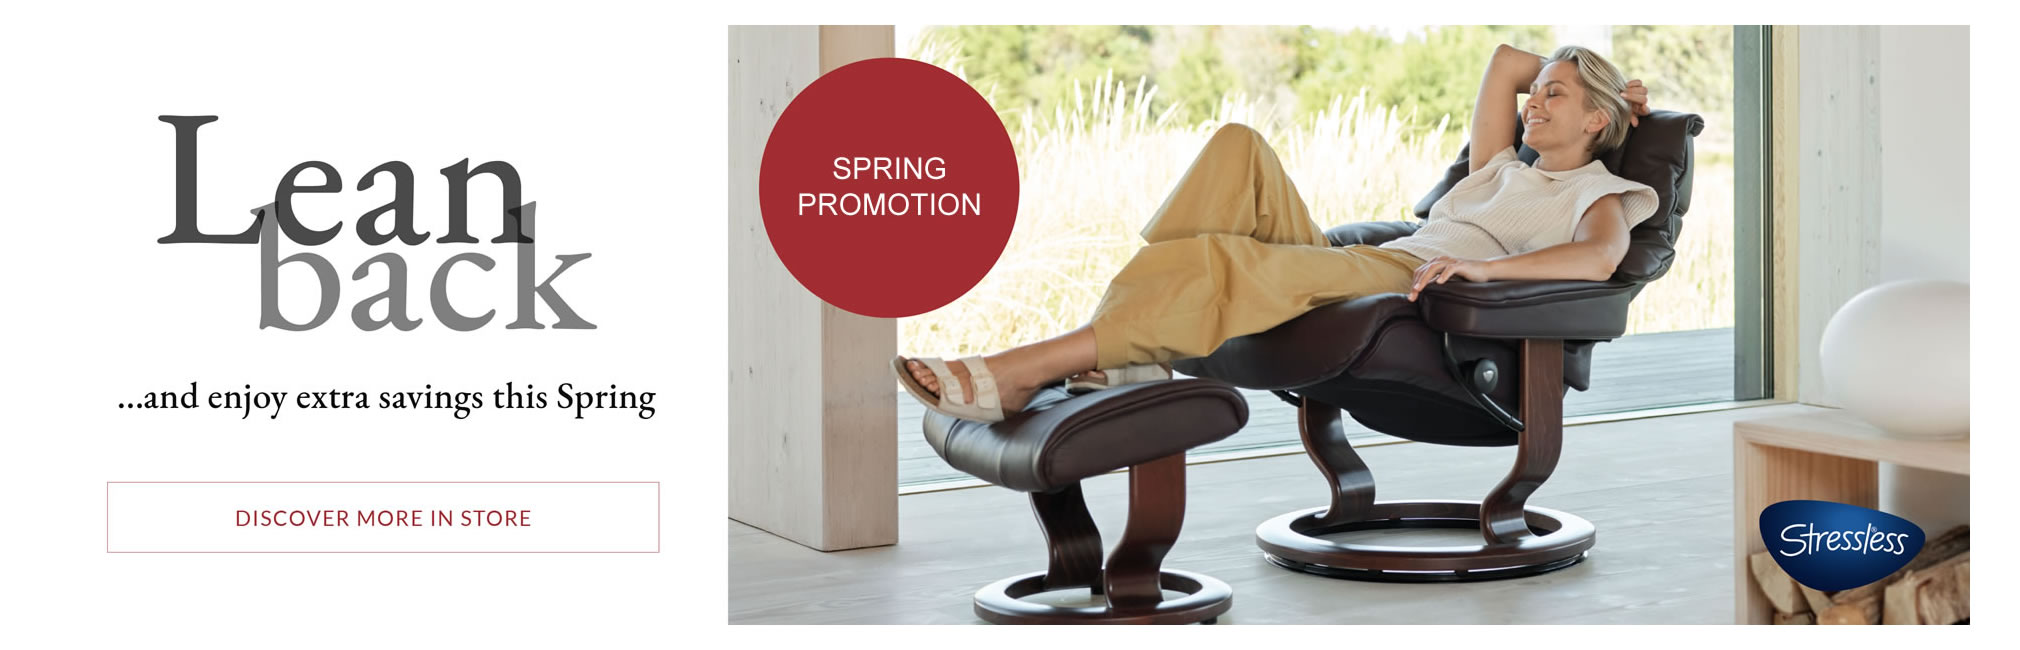 Save on selected Stressless ranges this spring